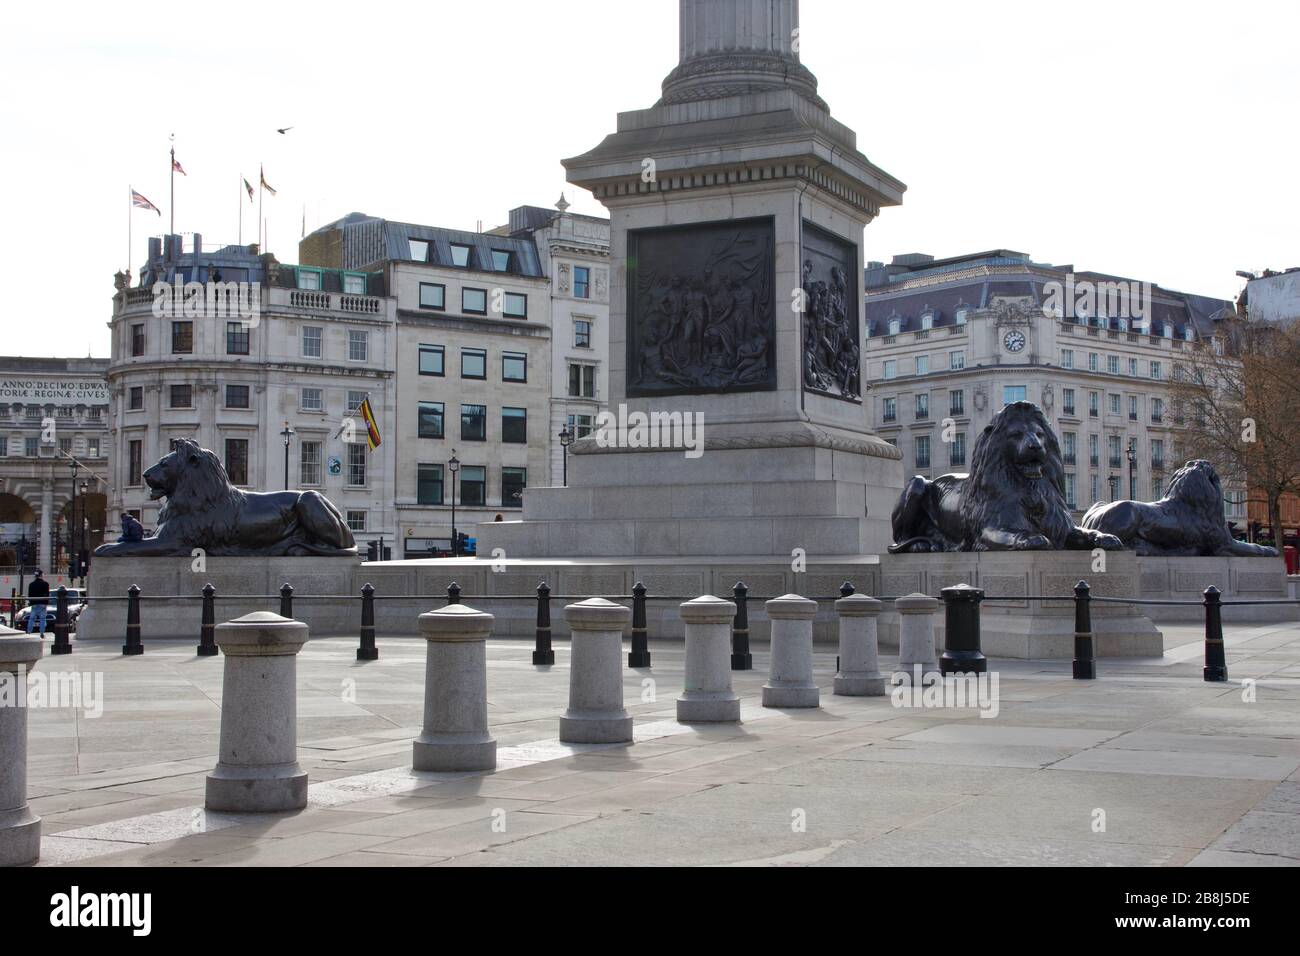 Coronavirus in London: An empty Trafalgar Square which would normally be full of tourists Stock Photo